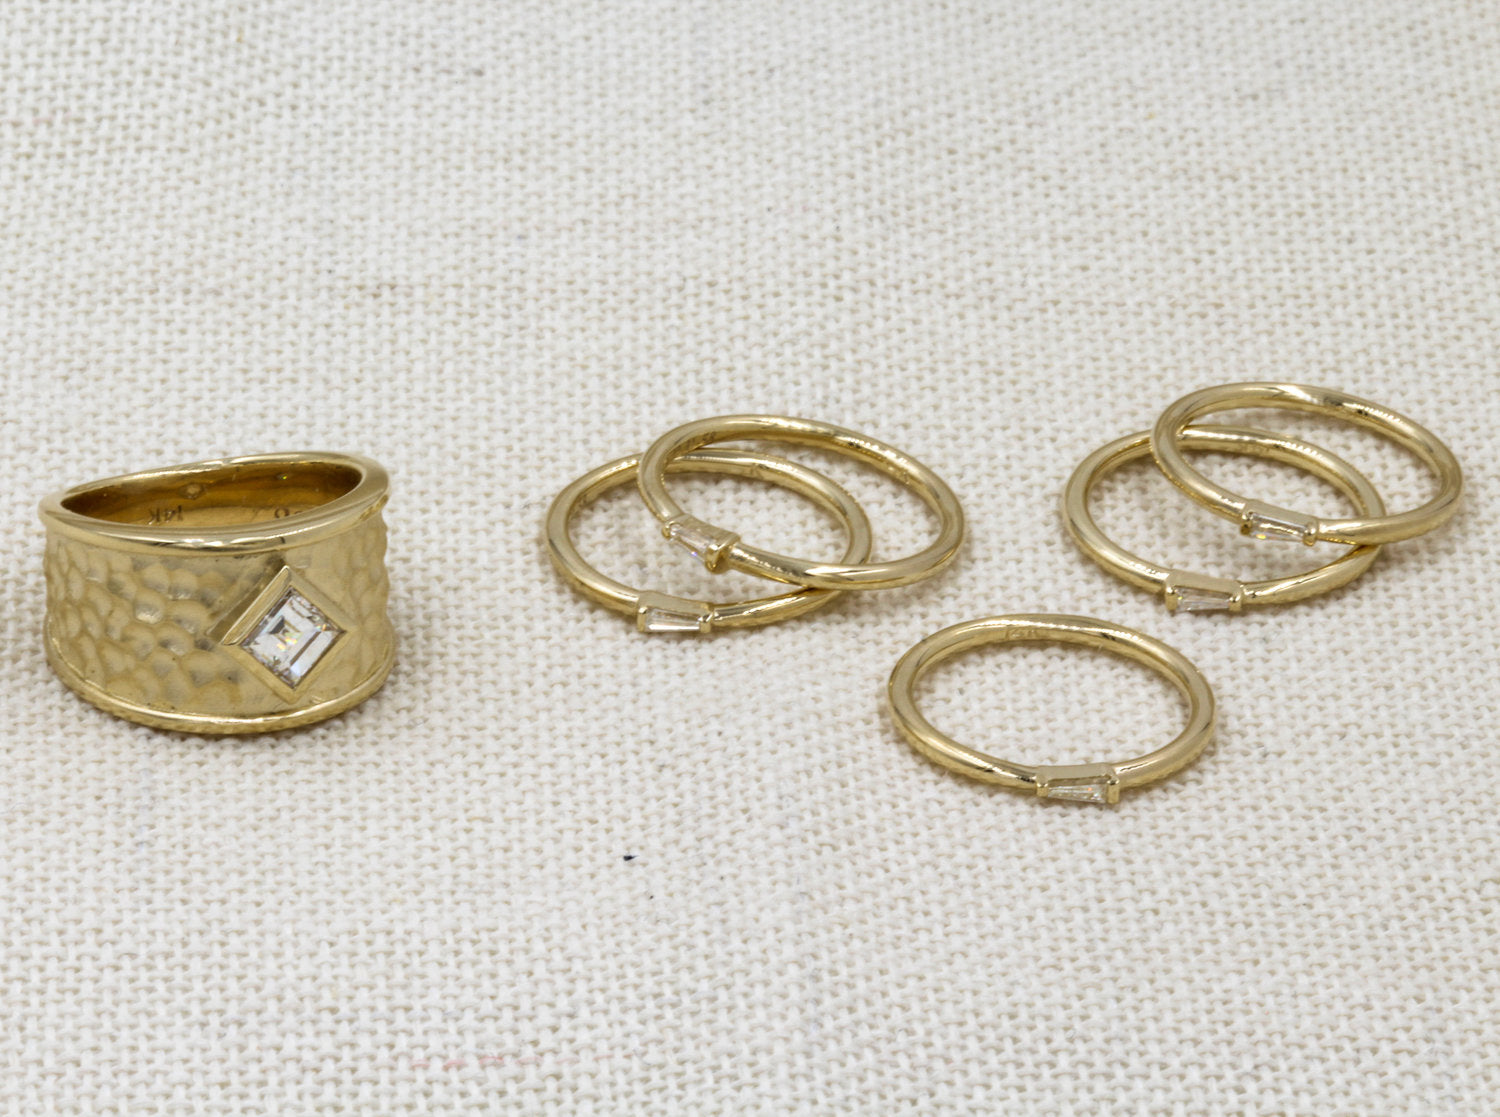 From Parents’ Wedding Set to Six New Rings